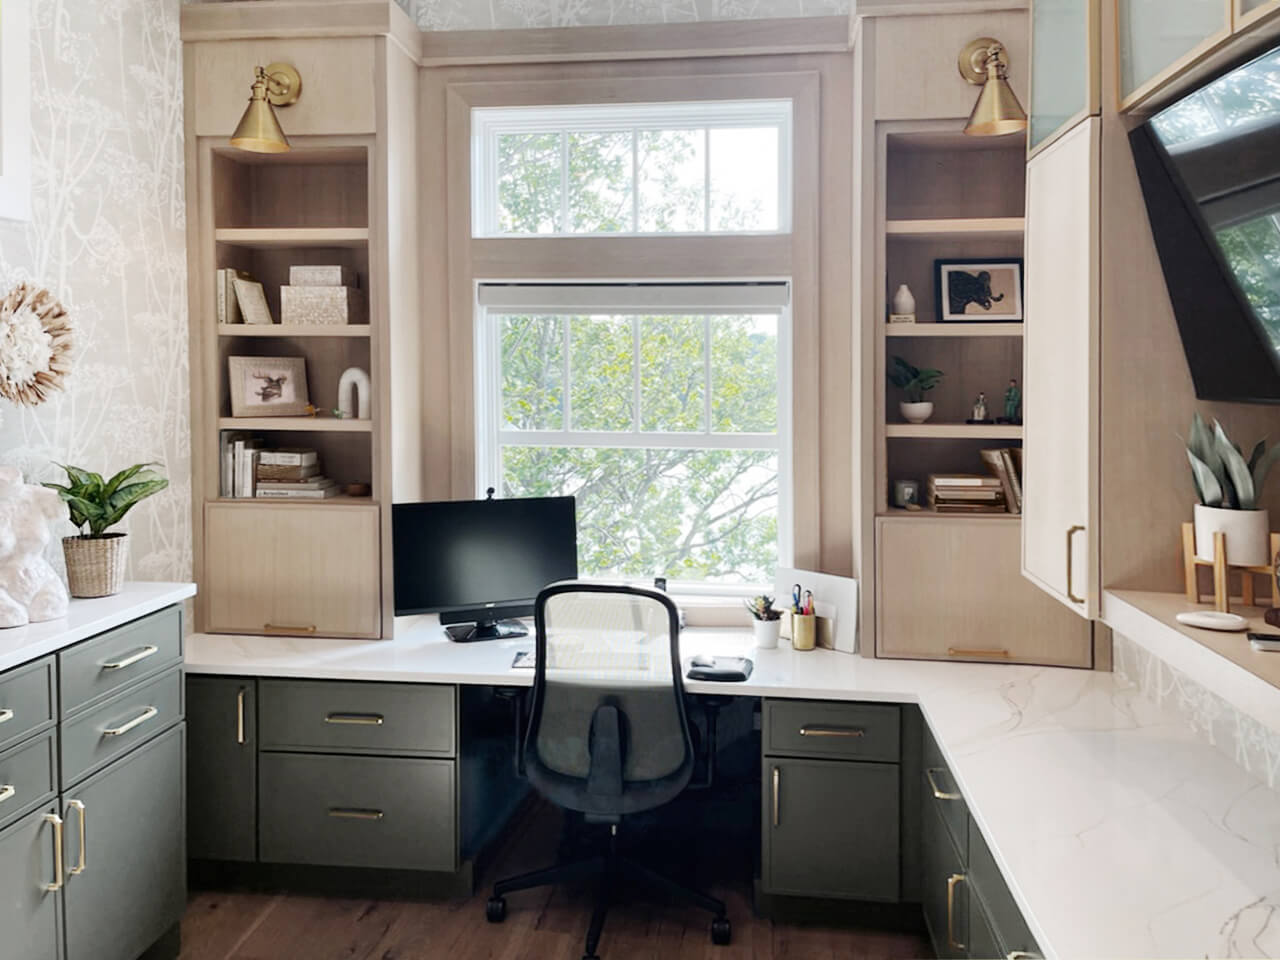 A new home office office with modern shaker doors in light wood and dark green paint colors with a window view.